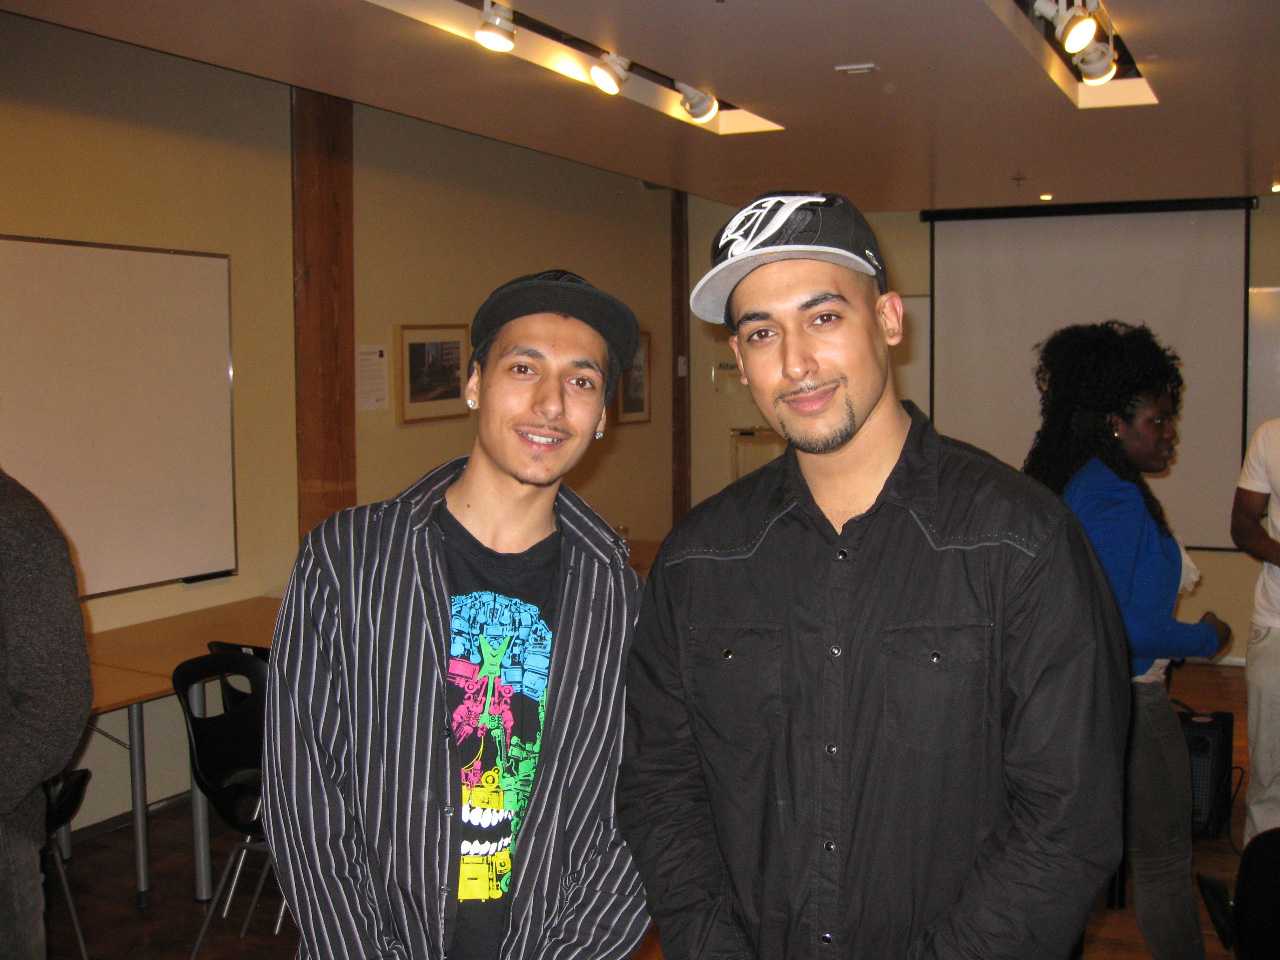 (L-R) Marc L. and Aaron K. from School Crack Inc.